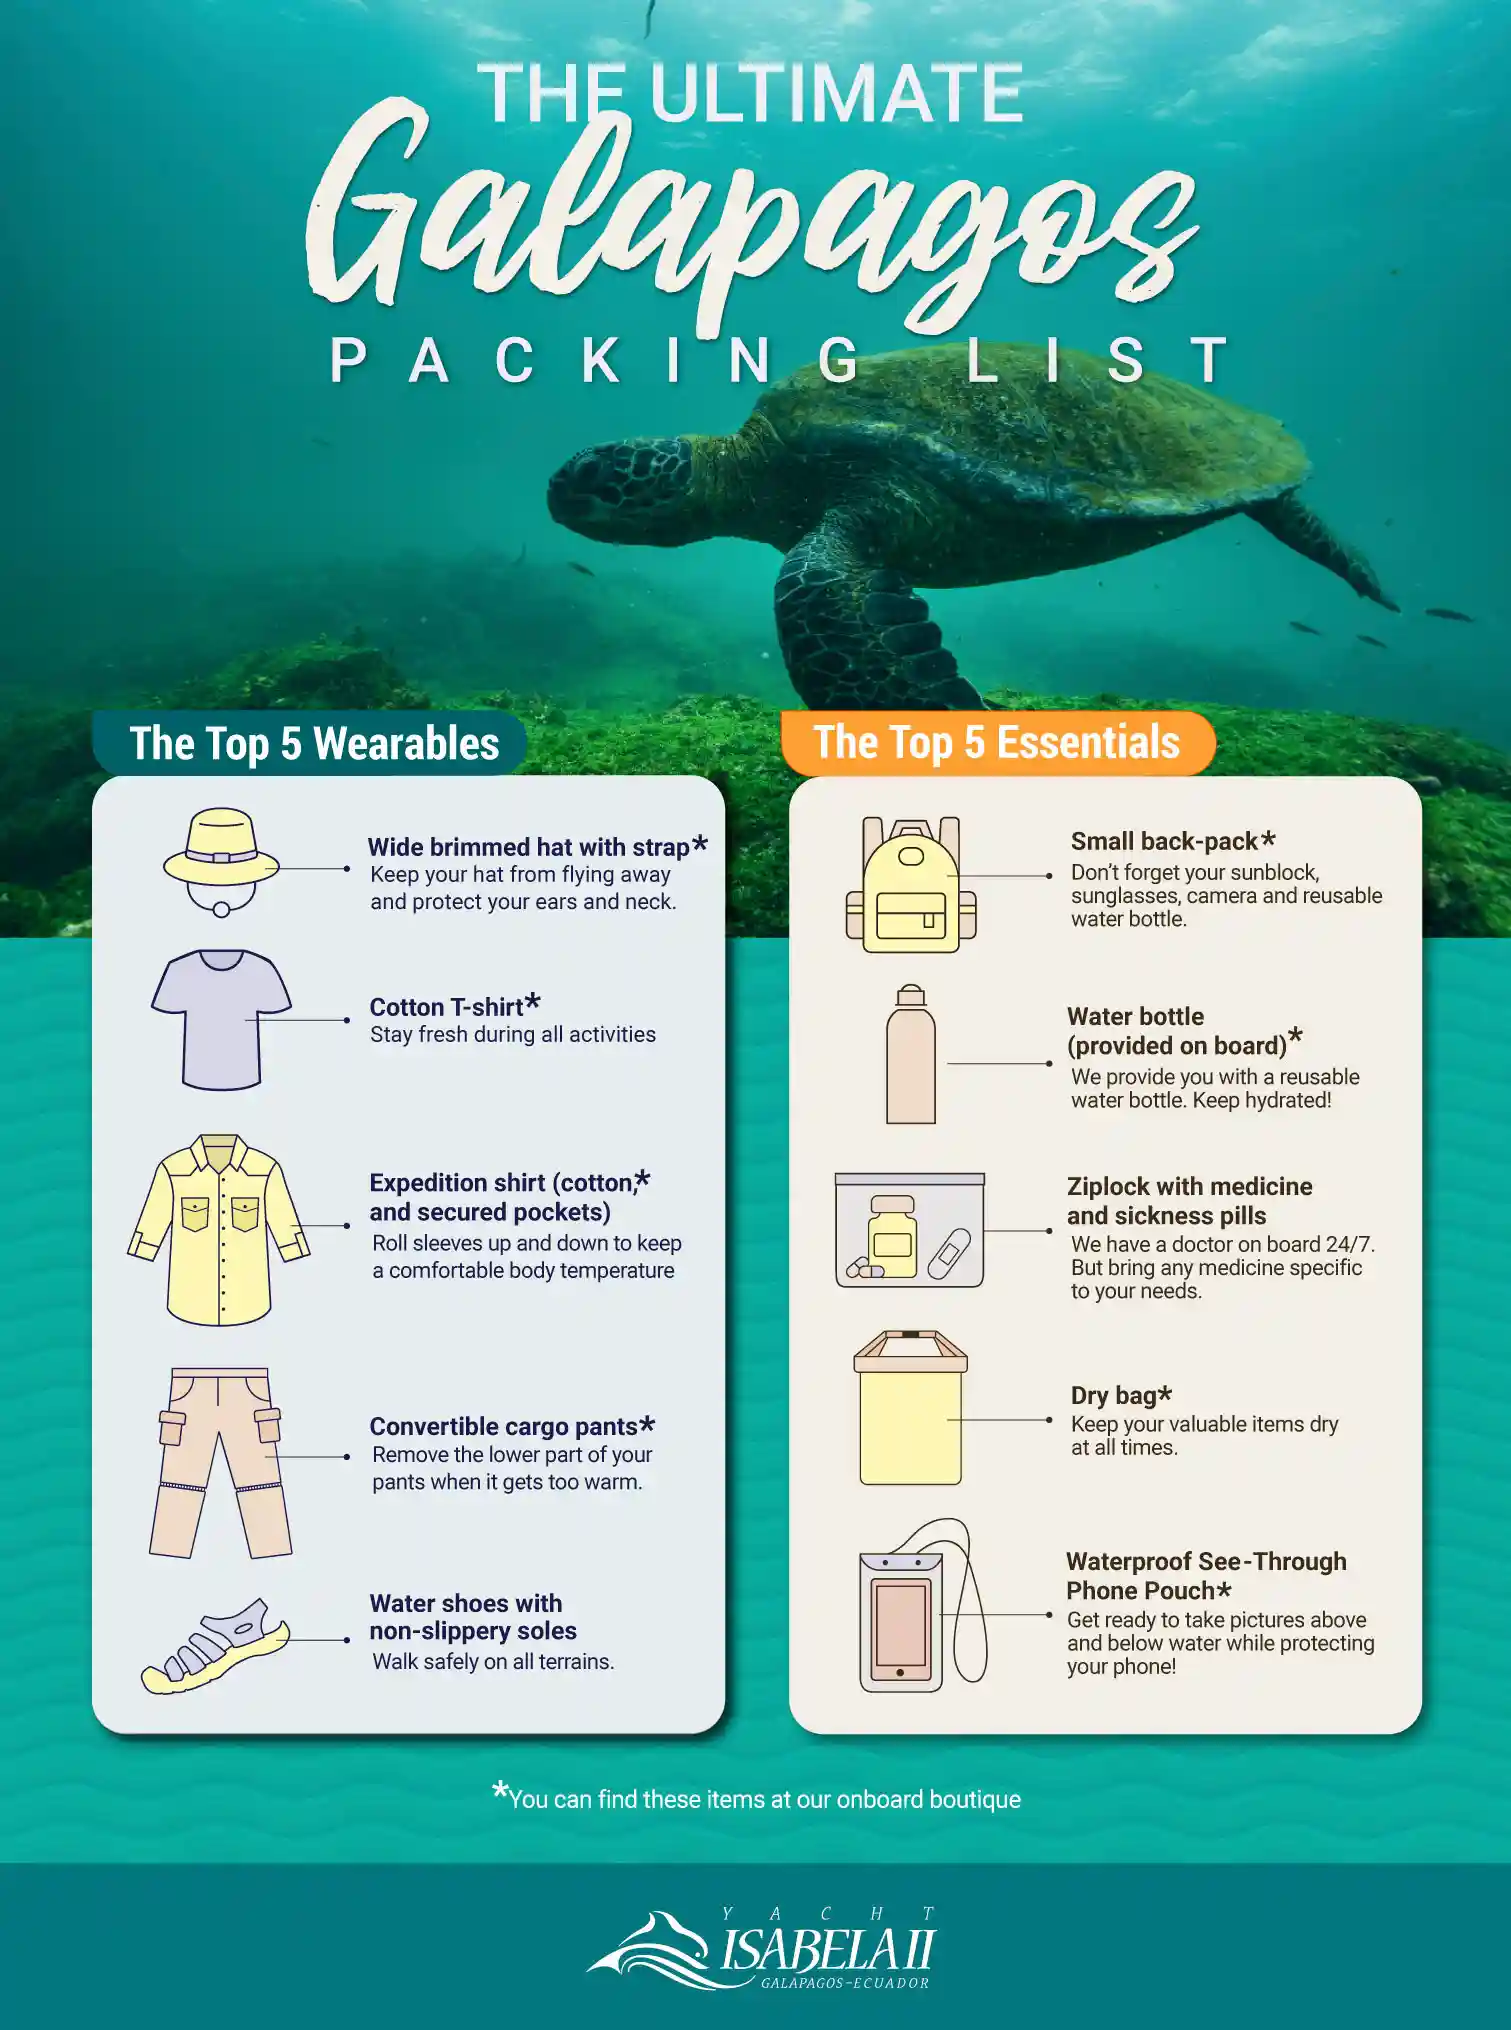 Everything you need to bring to the Galapagos Islands